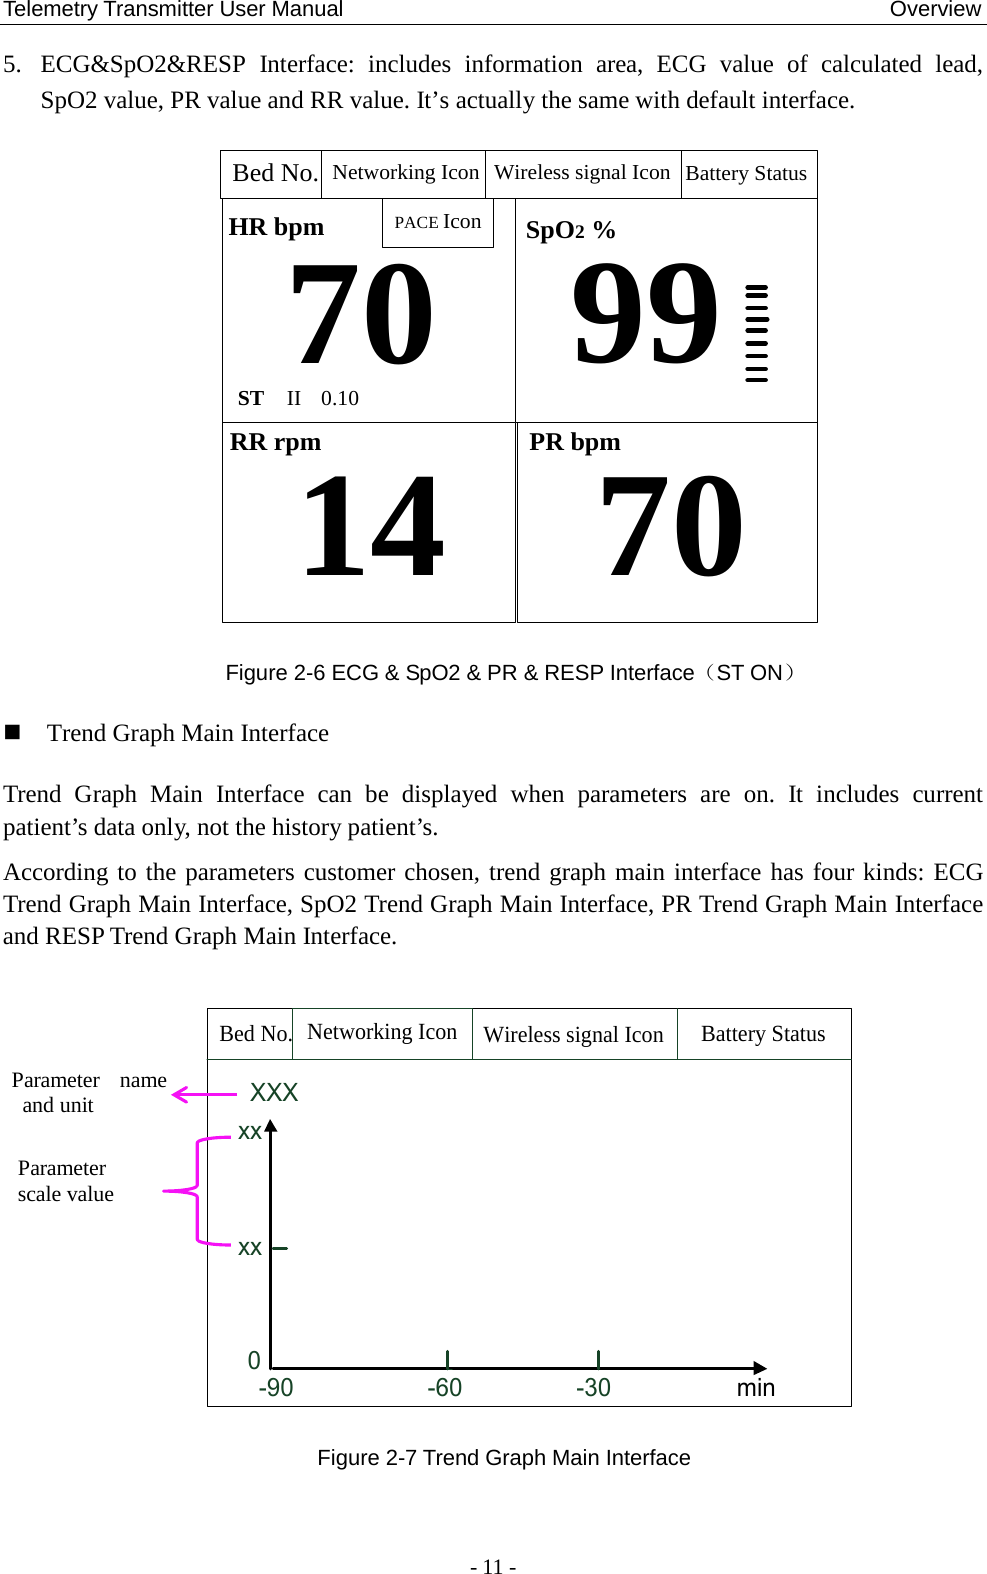 Telemetry Transmitter User Manual                                                  Overview 5. ECG&amp;SpO2&amp;RESP Interface: includes information area, ECG value of calculated lead, SpO2 value, PR value and RR value. It’s actually the same with default interface. 70SpO2 %99HR bpmRR rpm14ST II 0.10PR bpm70PACE IconBed No.Networking Icon Battery StatusWireless signal Icon Figure 2-6 ECG &amp; SpO2 &amp; PR &amp; RESP Interface（ST ON）  Trend Graph Main Interface Trend Graph Main Interface can be  displayed when parameters are  on.  It includes current patient’s data only, not the history patient’s.   According to the parameters customer chosen, trend graph main interface has four kinds: ECG Trend Graph Main Interface, SpO2 Trend Graph Main Interface, PR Trend Graph Main Interface and RESP Trend Graph Main Interface.          Networking IconBed No.Wireless signal Icon Battery StatusminXXX0xx-90                    -60                 -30xx   Figure 2-7 Trend Graph Main Interface  Parameter name and unit Parameter scale value  - 11 - 